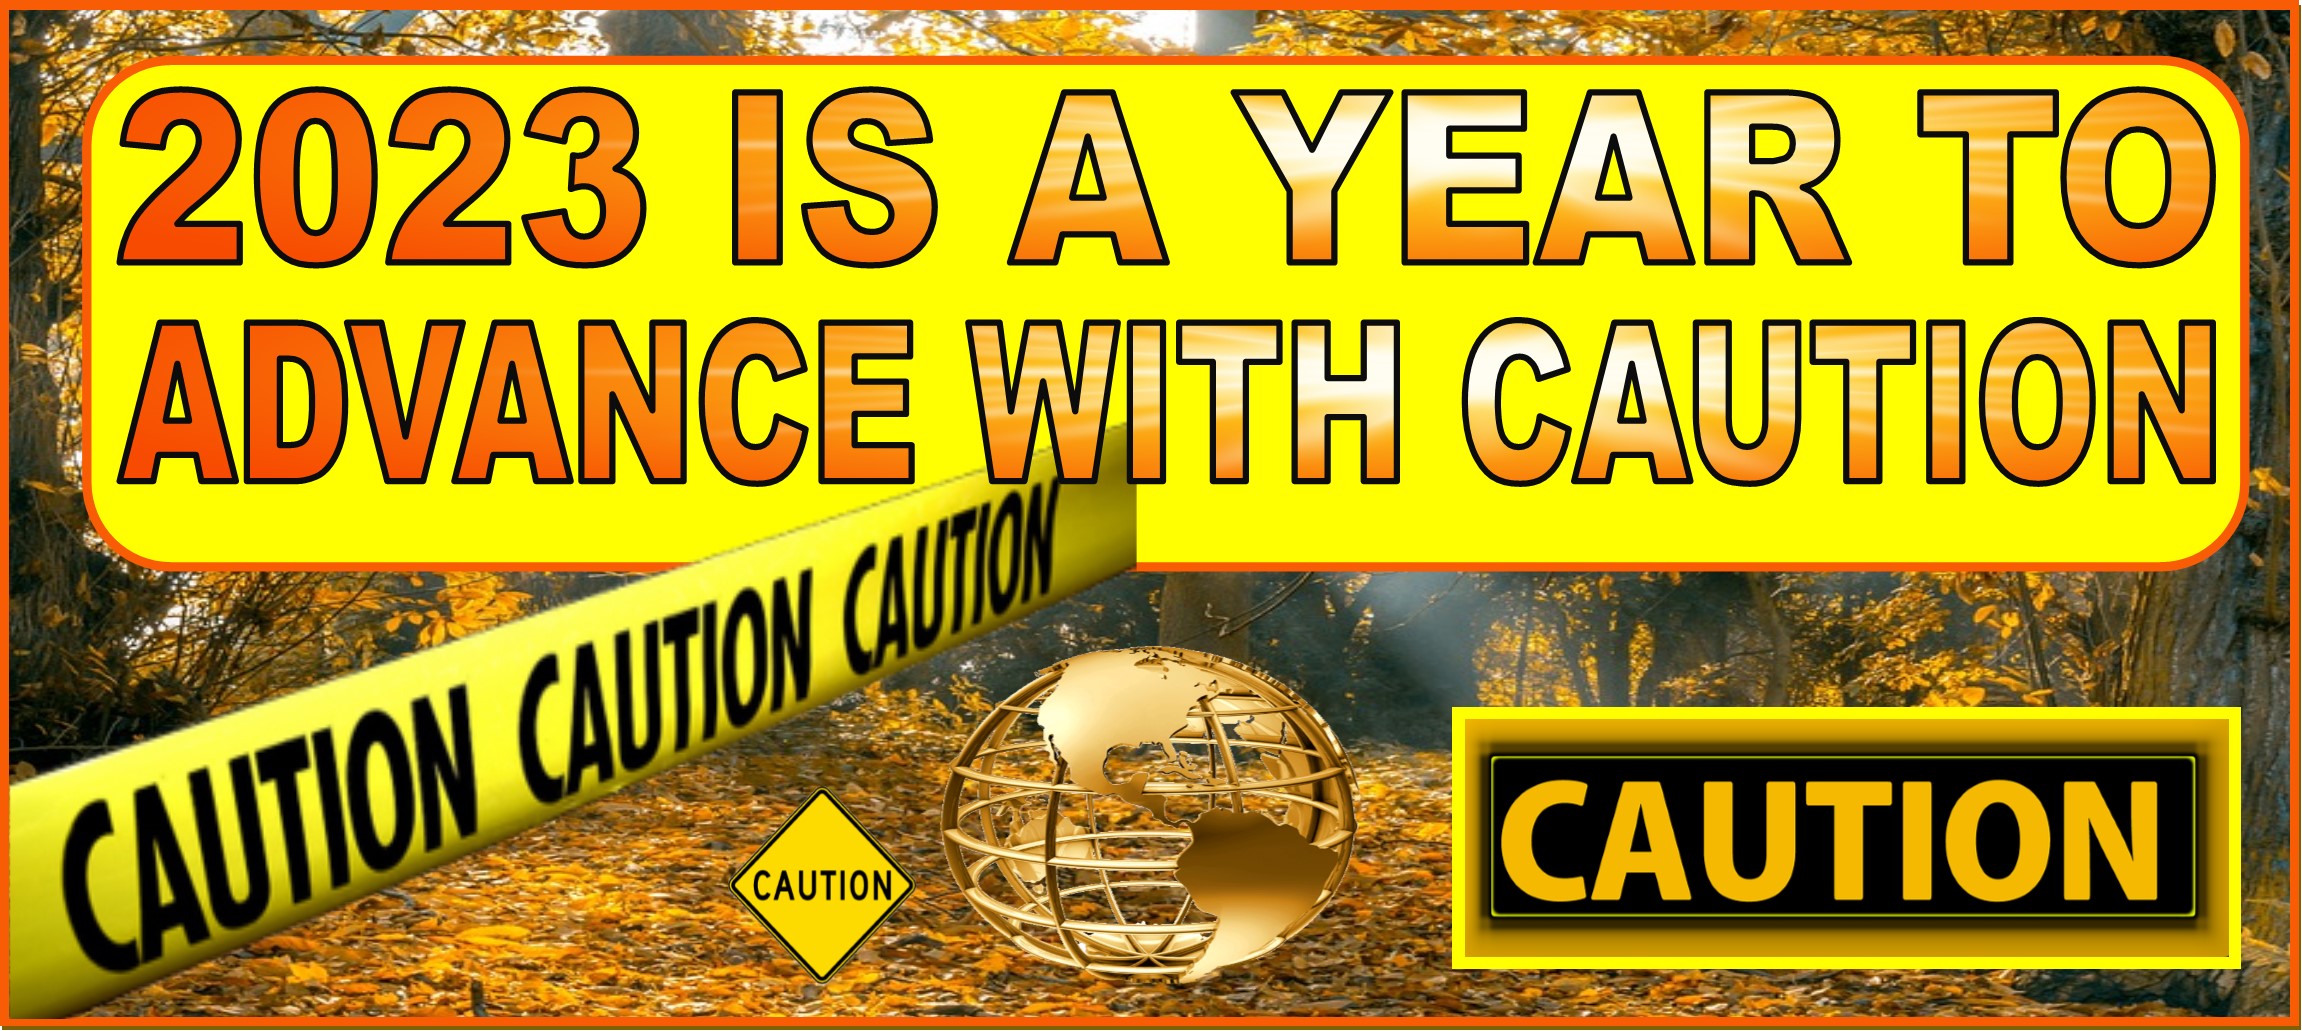 2023 IS A YEAR TO ADVANCE WITH CAUTION WEBSITE HEADER 3-1-2023